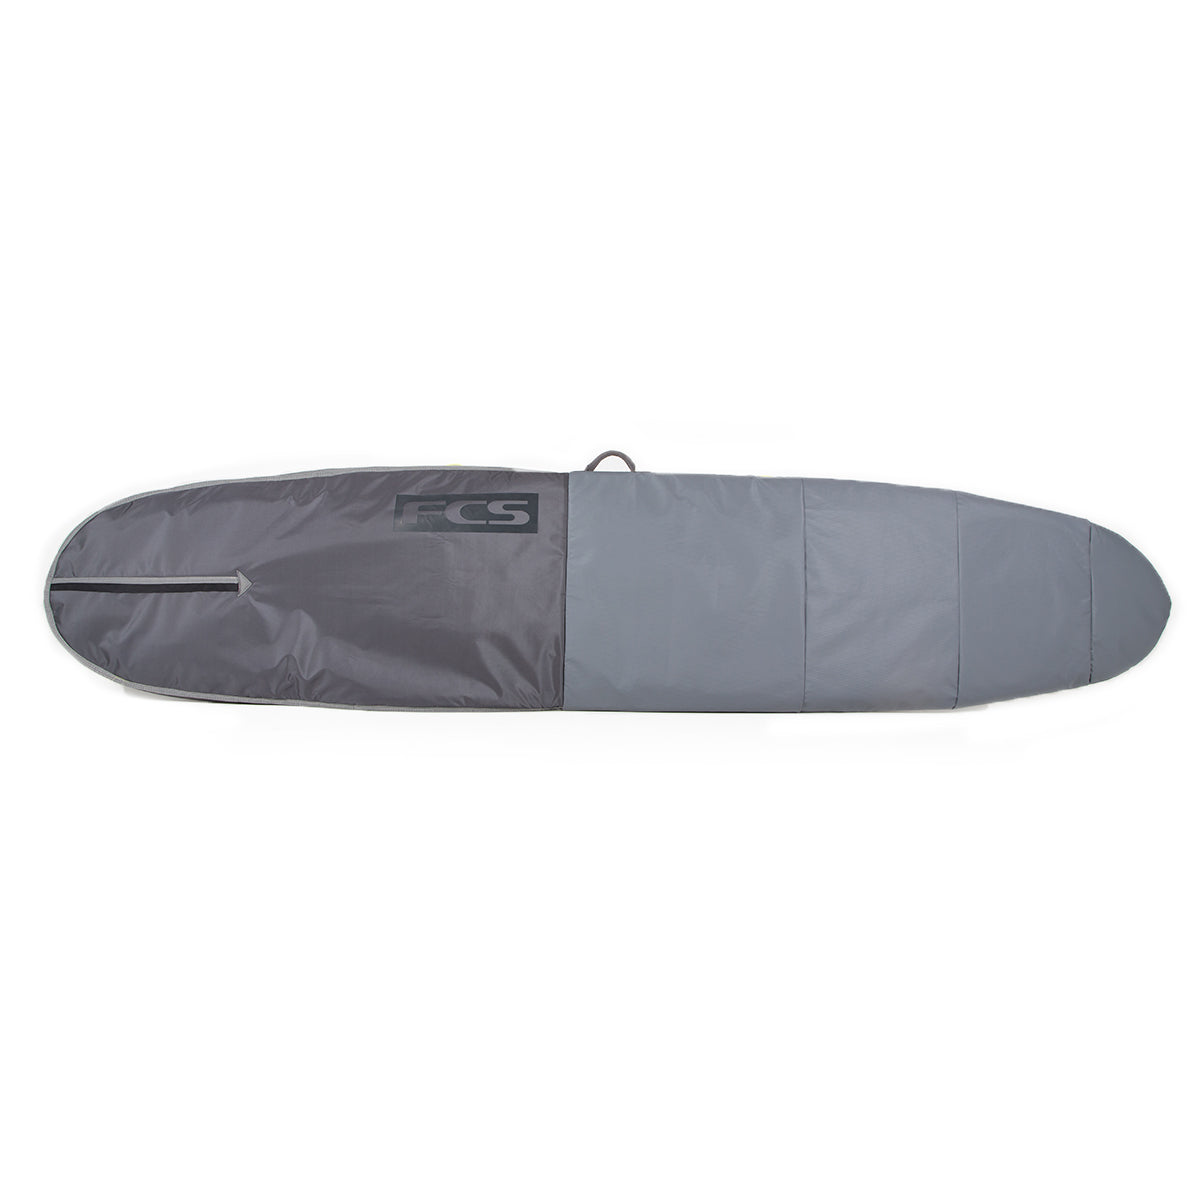 FCS Day Long Board Cover | 8'6 Cool Grey